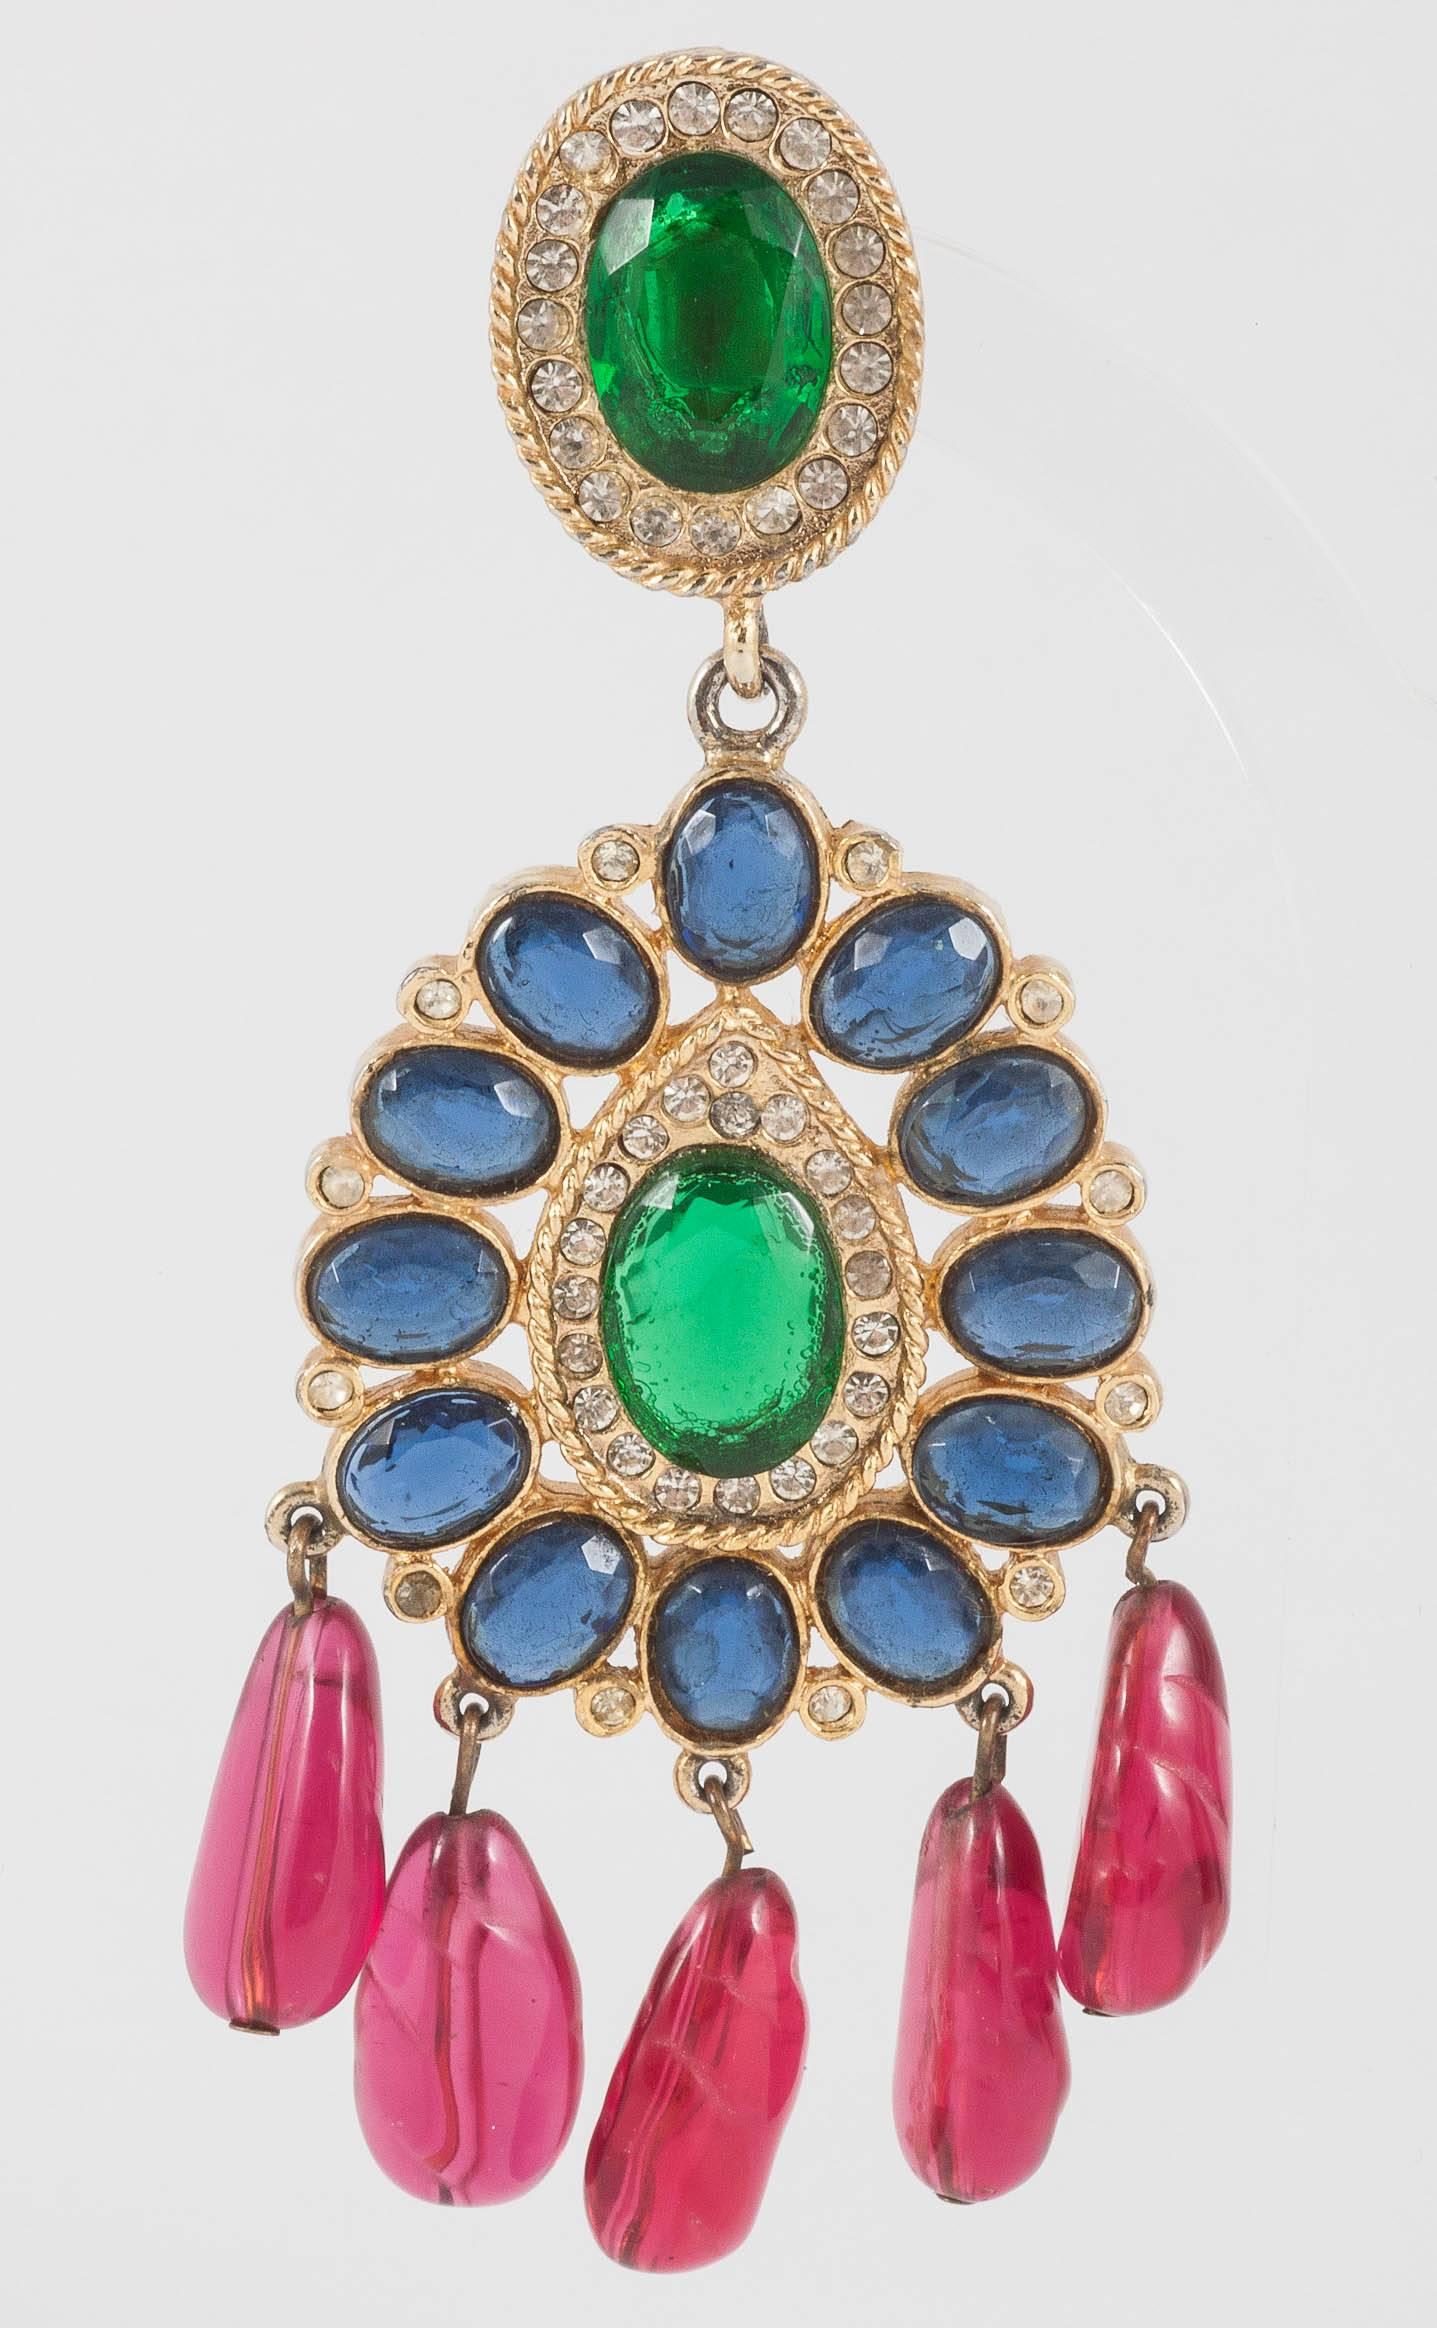 These Kenneth Jay Lane earrings come from the early period of his career and have all the pizazz that that implies. The colour combination is slightly moghul influenced and they have real grandeur. 
The earrings are quite heavy but are well made and